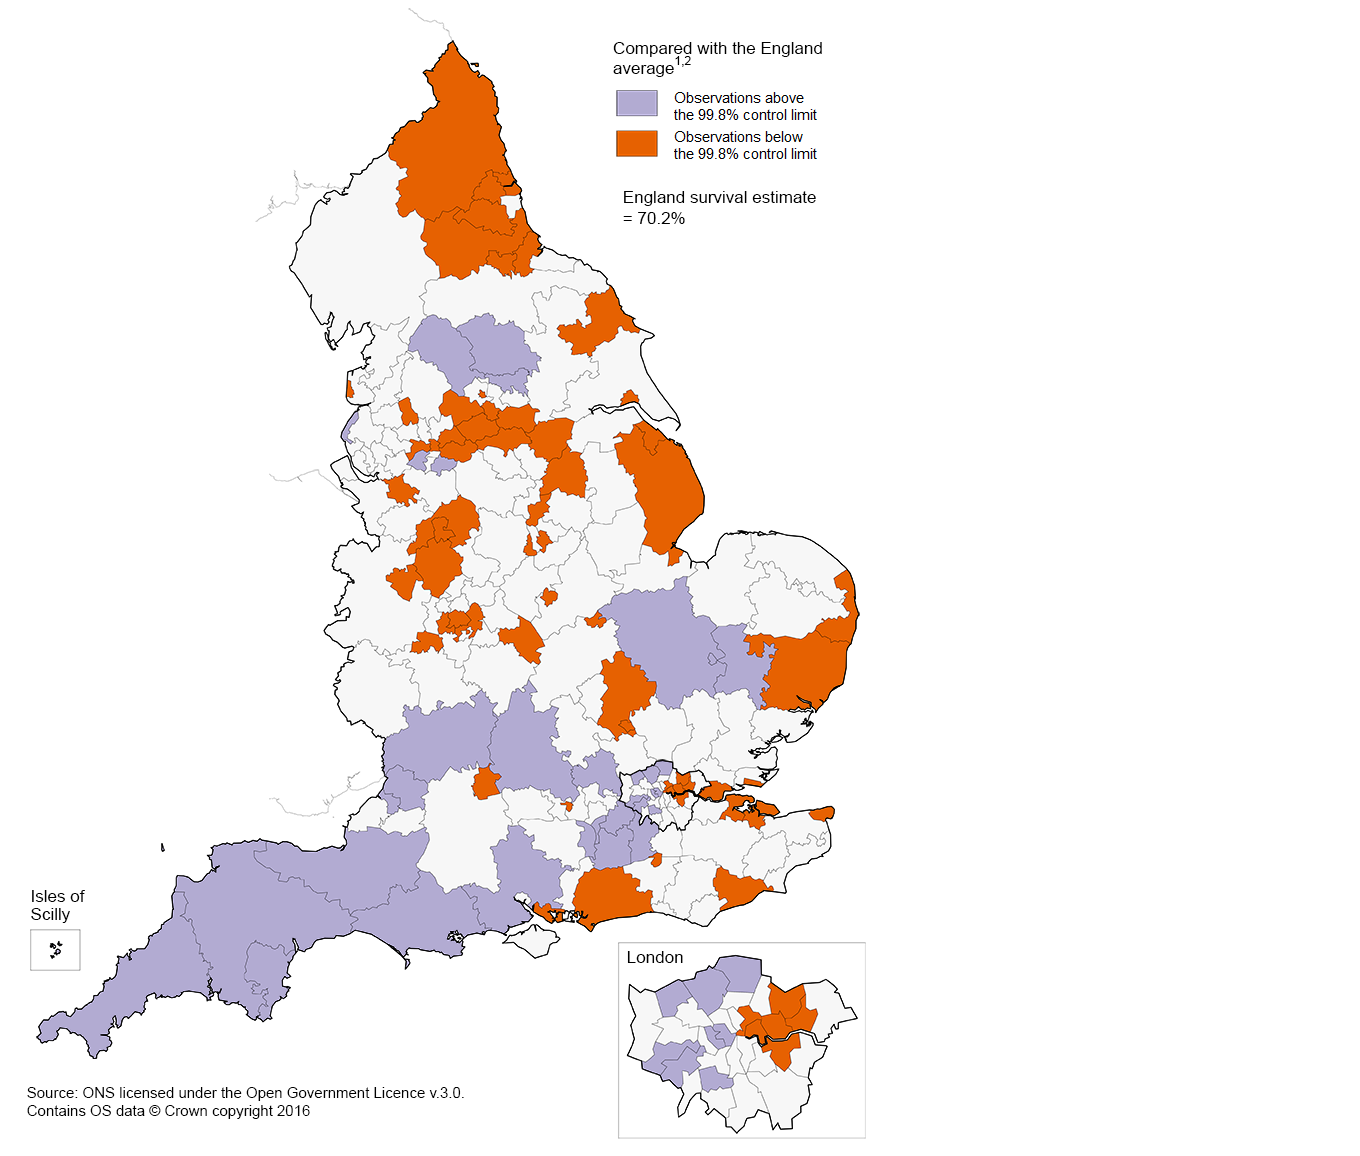 Survival is generally lower in the north of England compared with the south of England